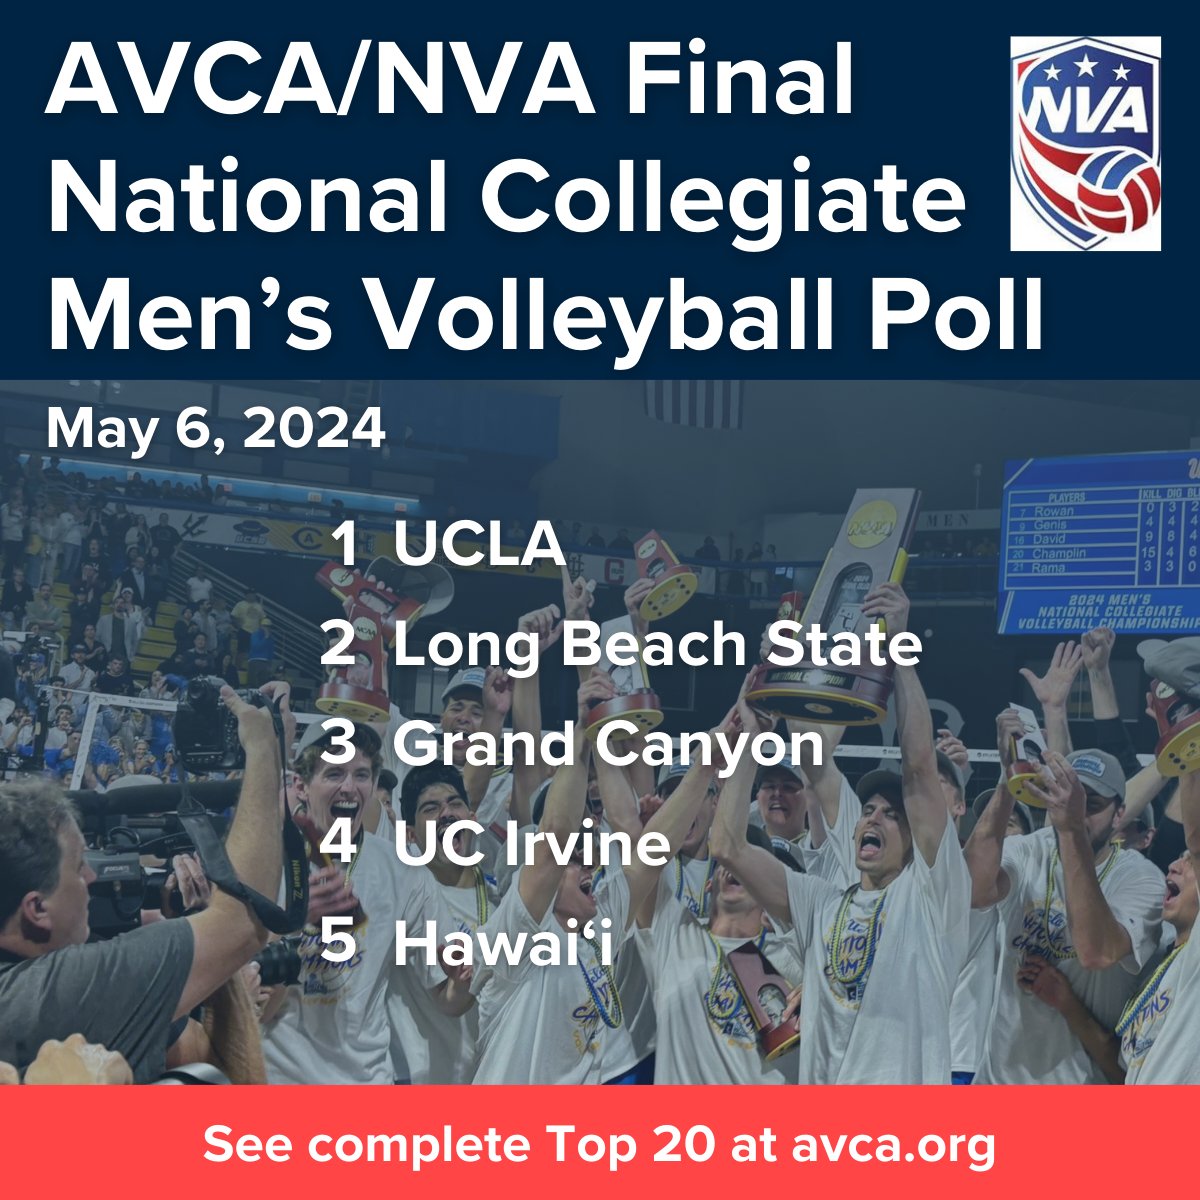 After winning the national title, @UCLAMVB is No. 1 in the final AVCA/NVA National Collegiate Men’s Volleyball Poll. The Bruins beat Long Beach State in front of a packed house at Walter Pyramid to earn their second-consecutive title. avca.org/polls-awards/p… #WeAreAVCA #NCAAMVB